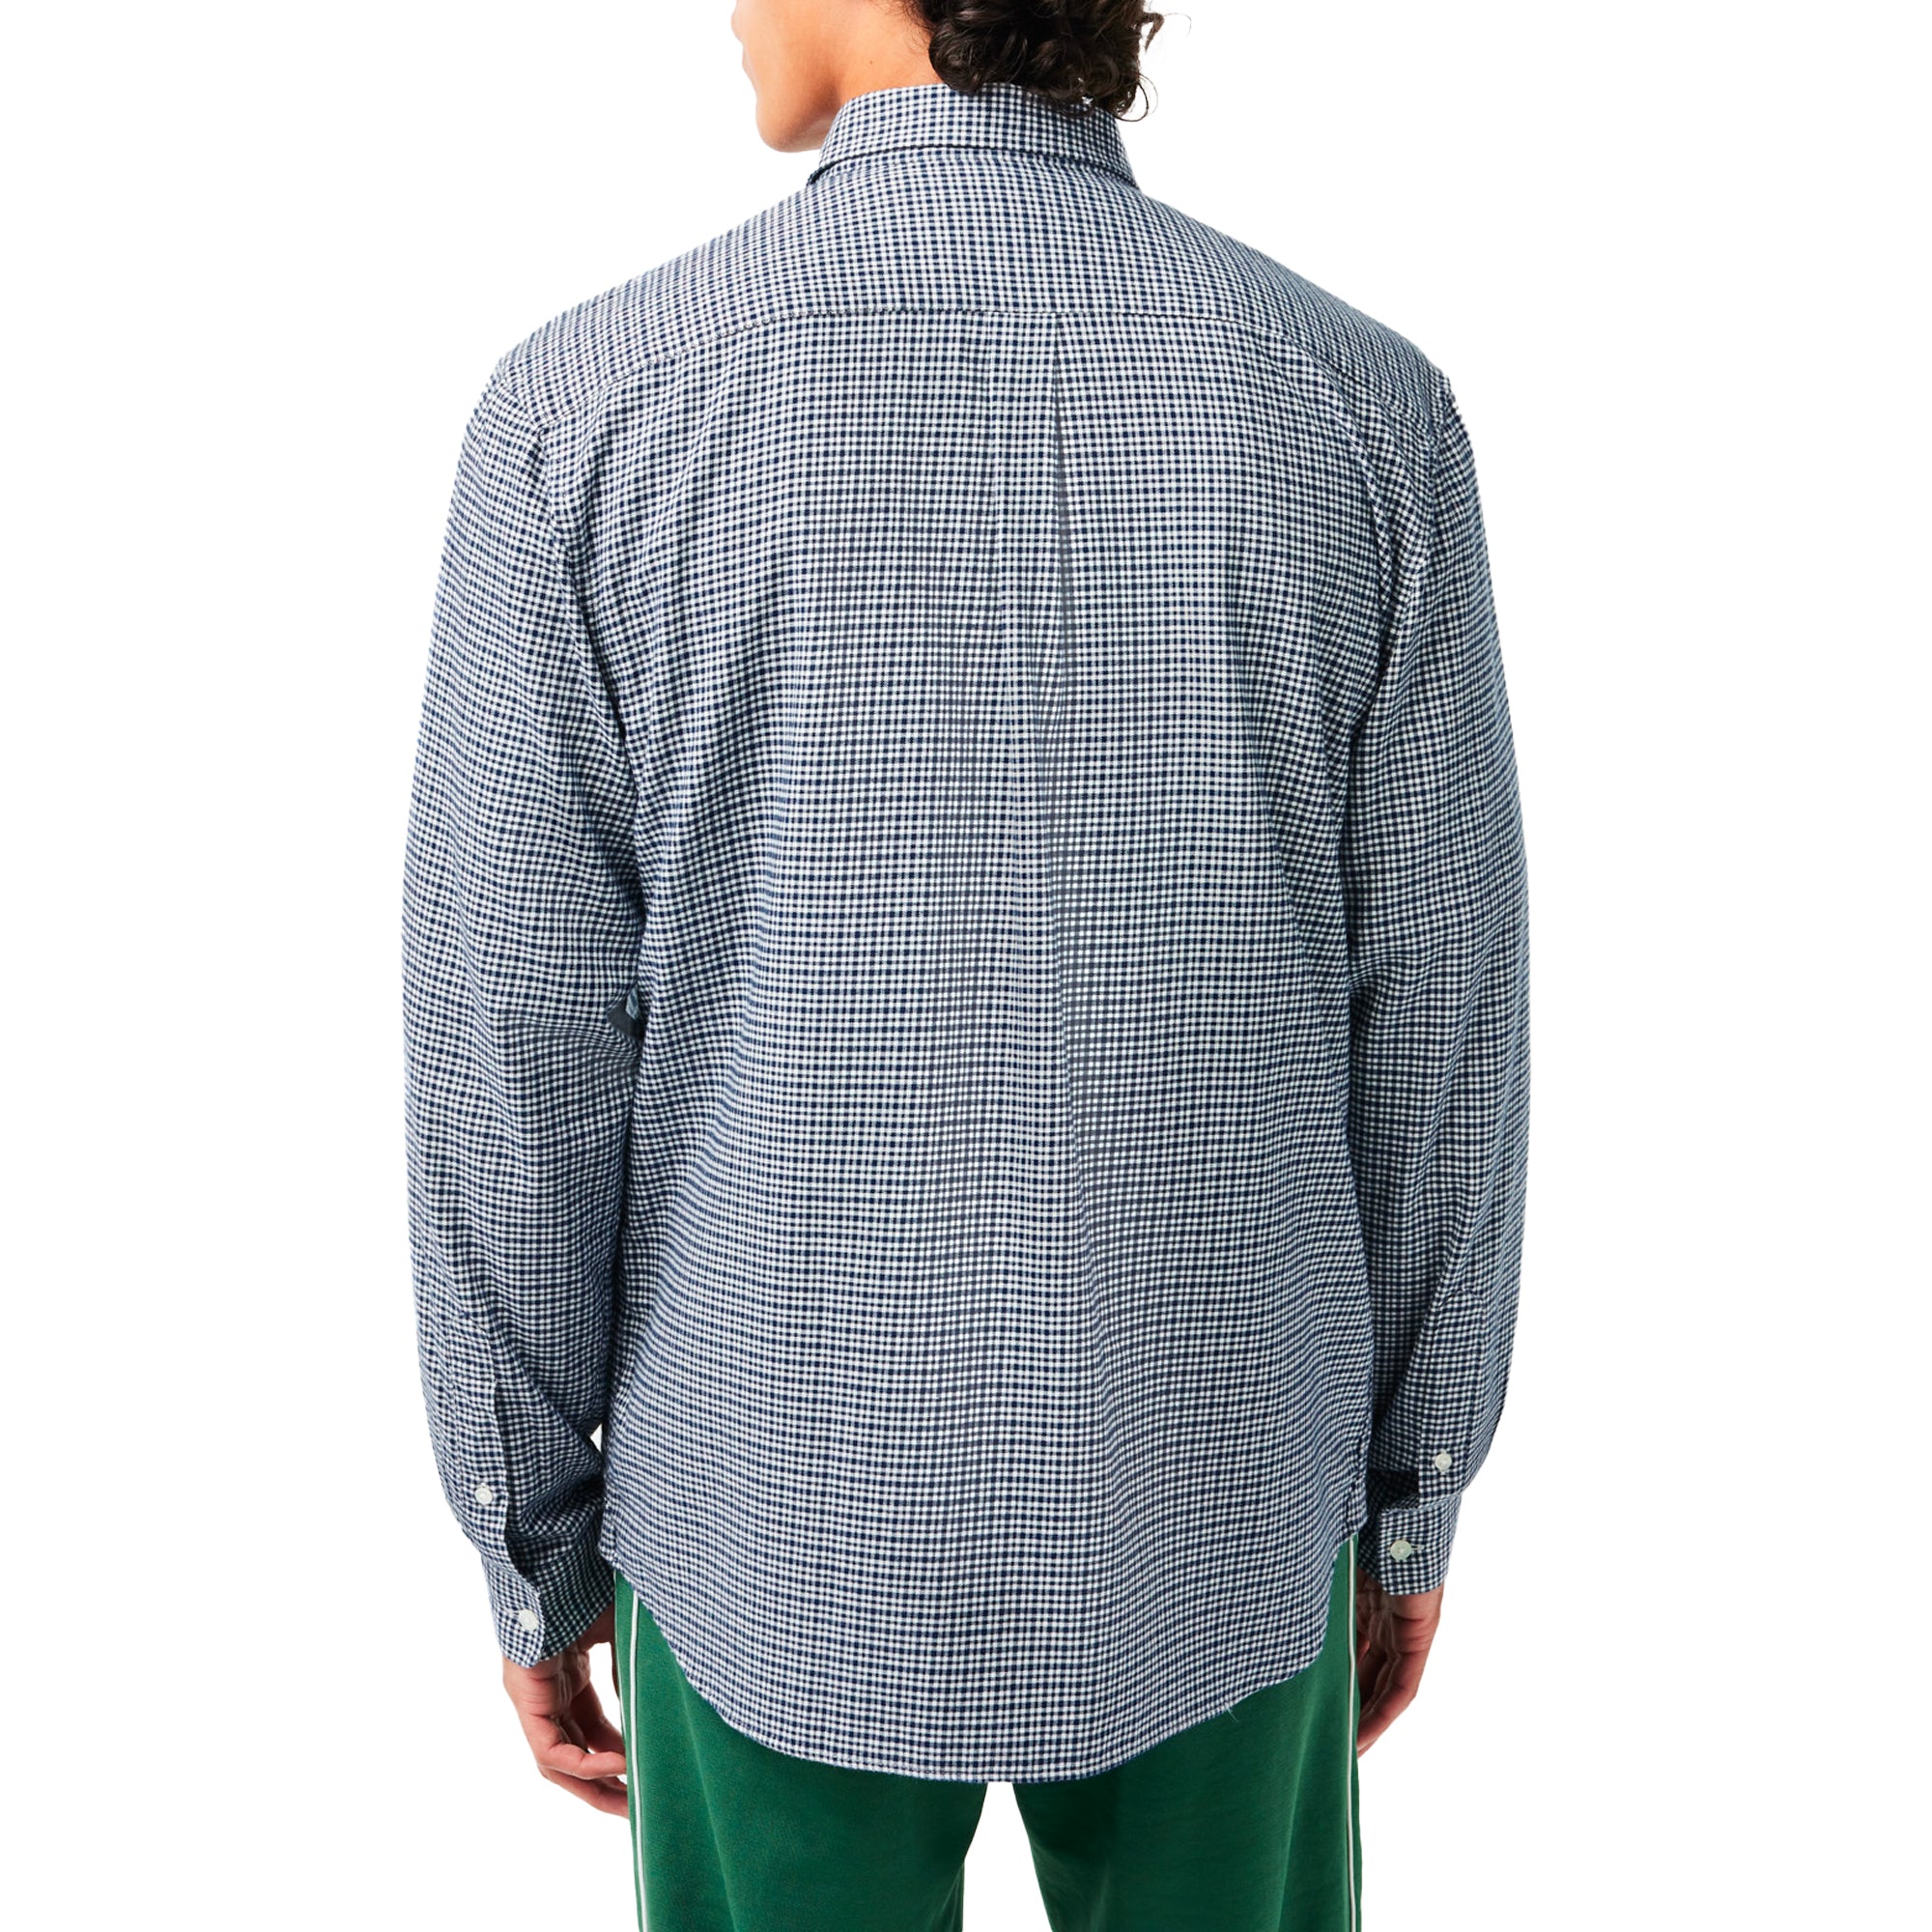 Lacoste Brushed Cotton Gingham Check Shirt CH1885 - Navy / White